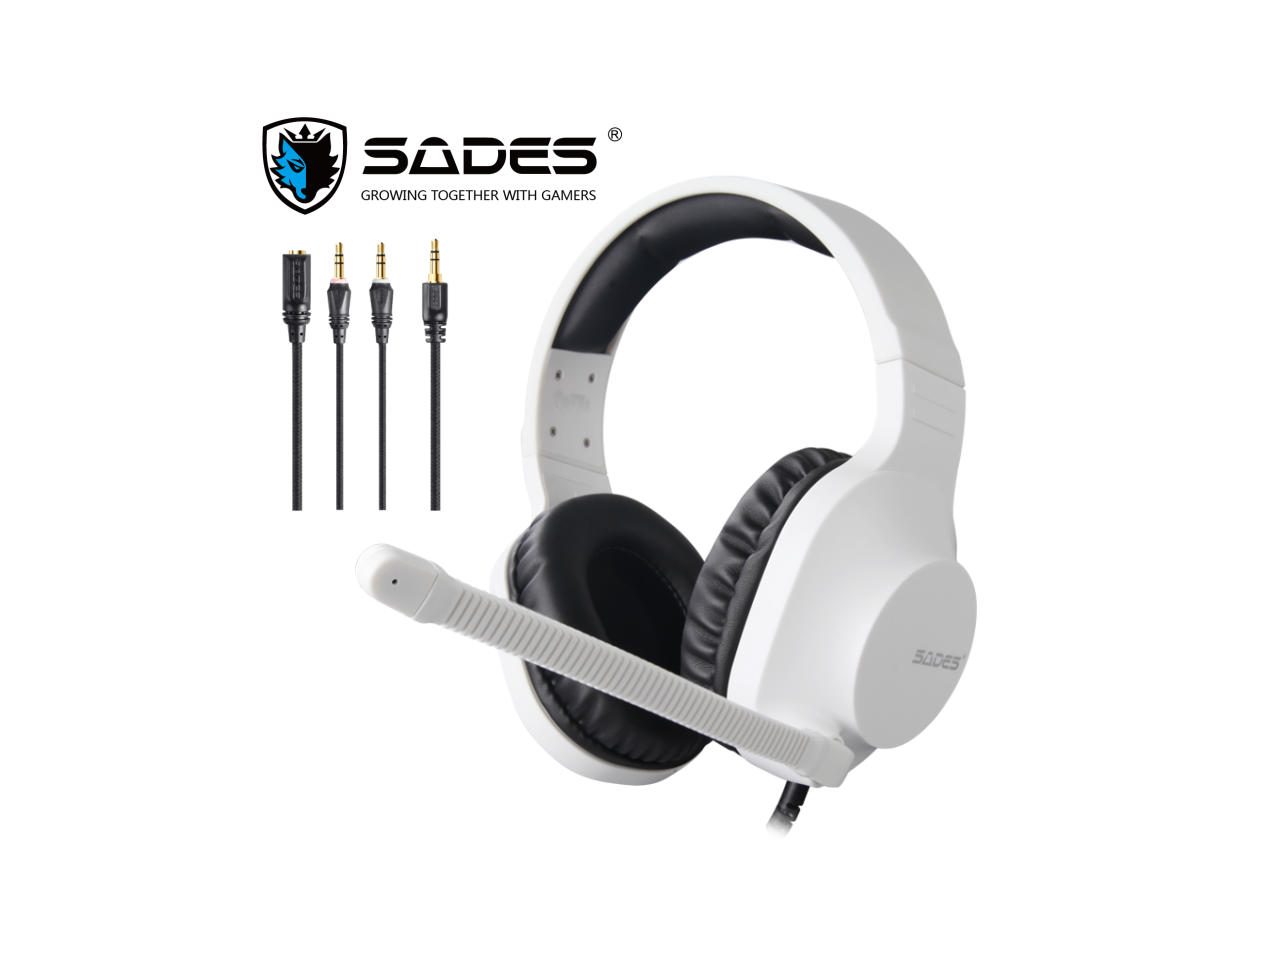 please connect the sades headset